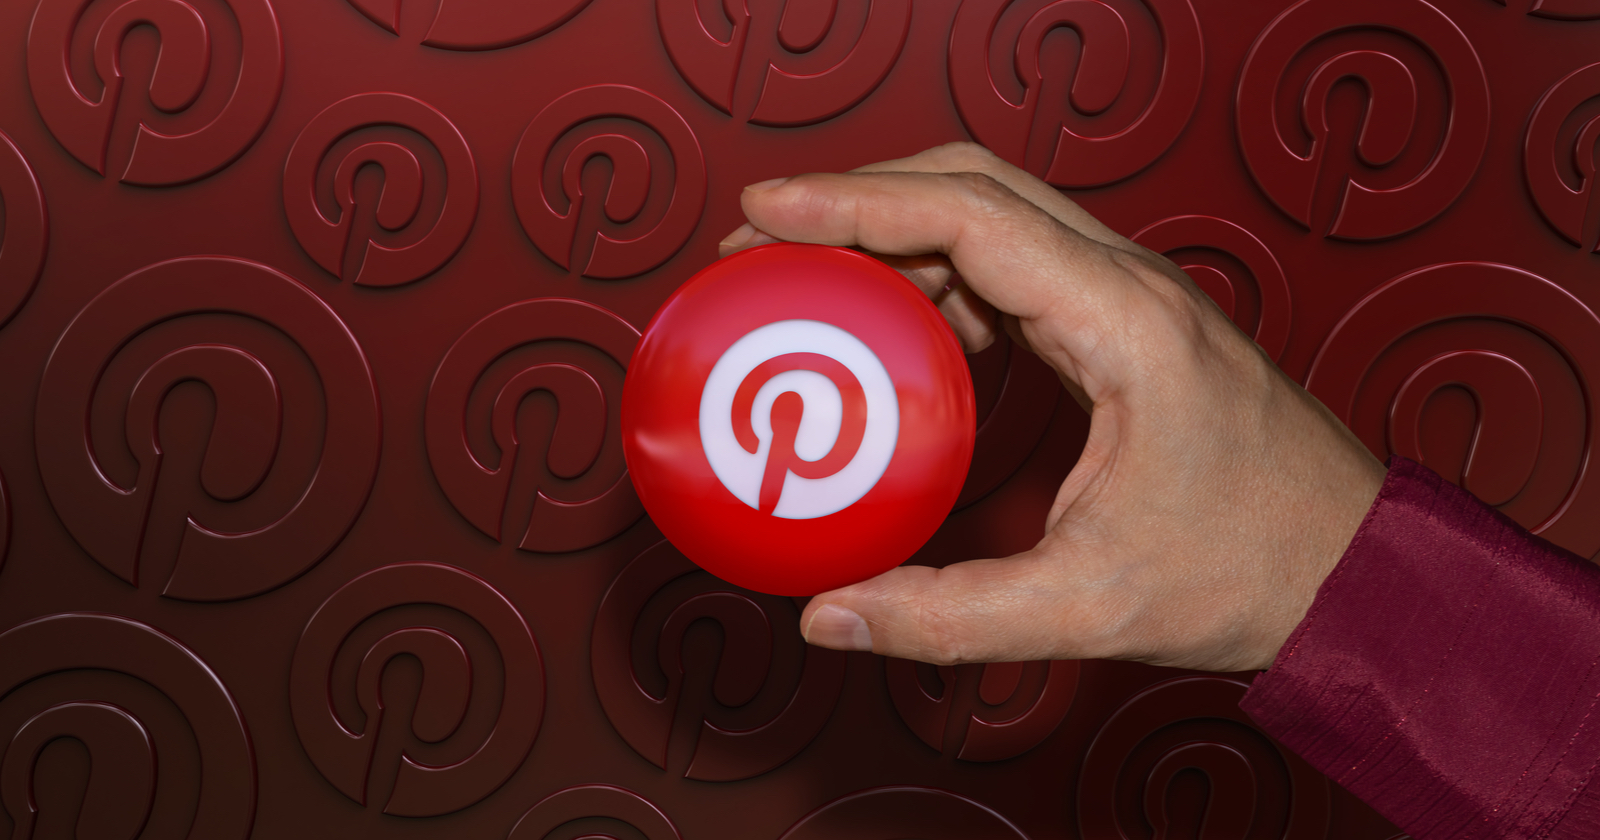 pinterest search trends 605b9c1a3f82a